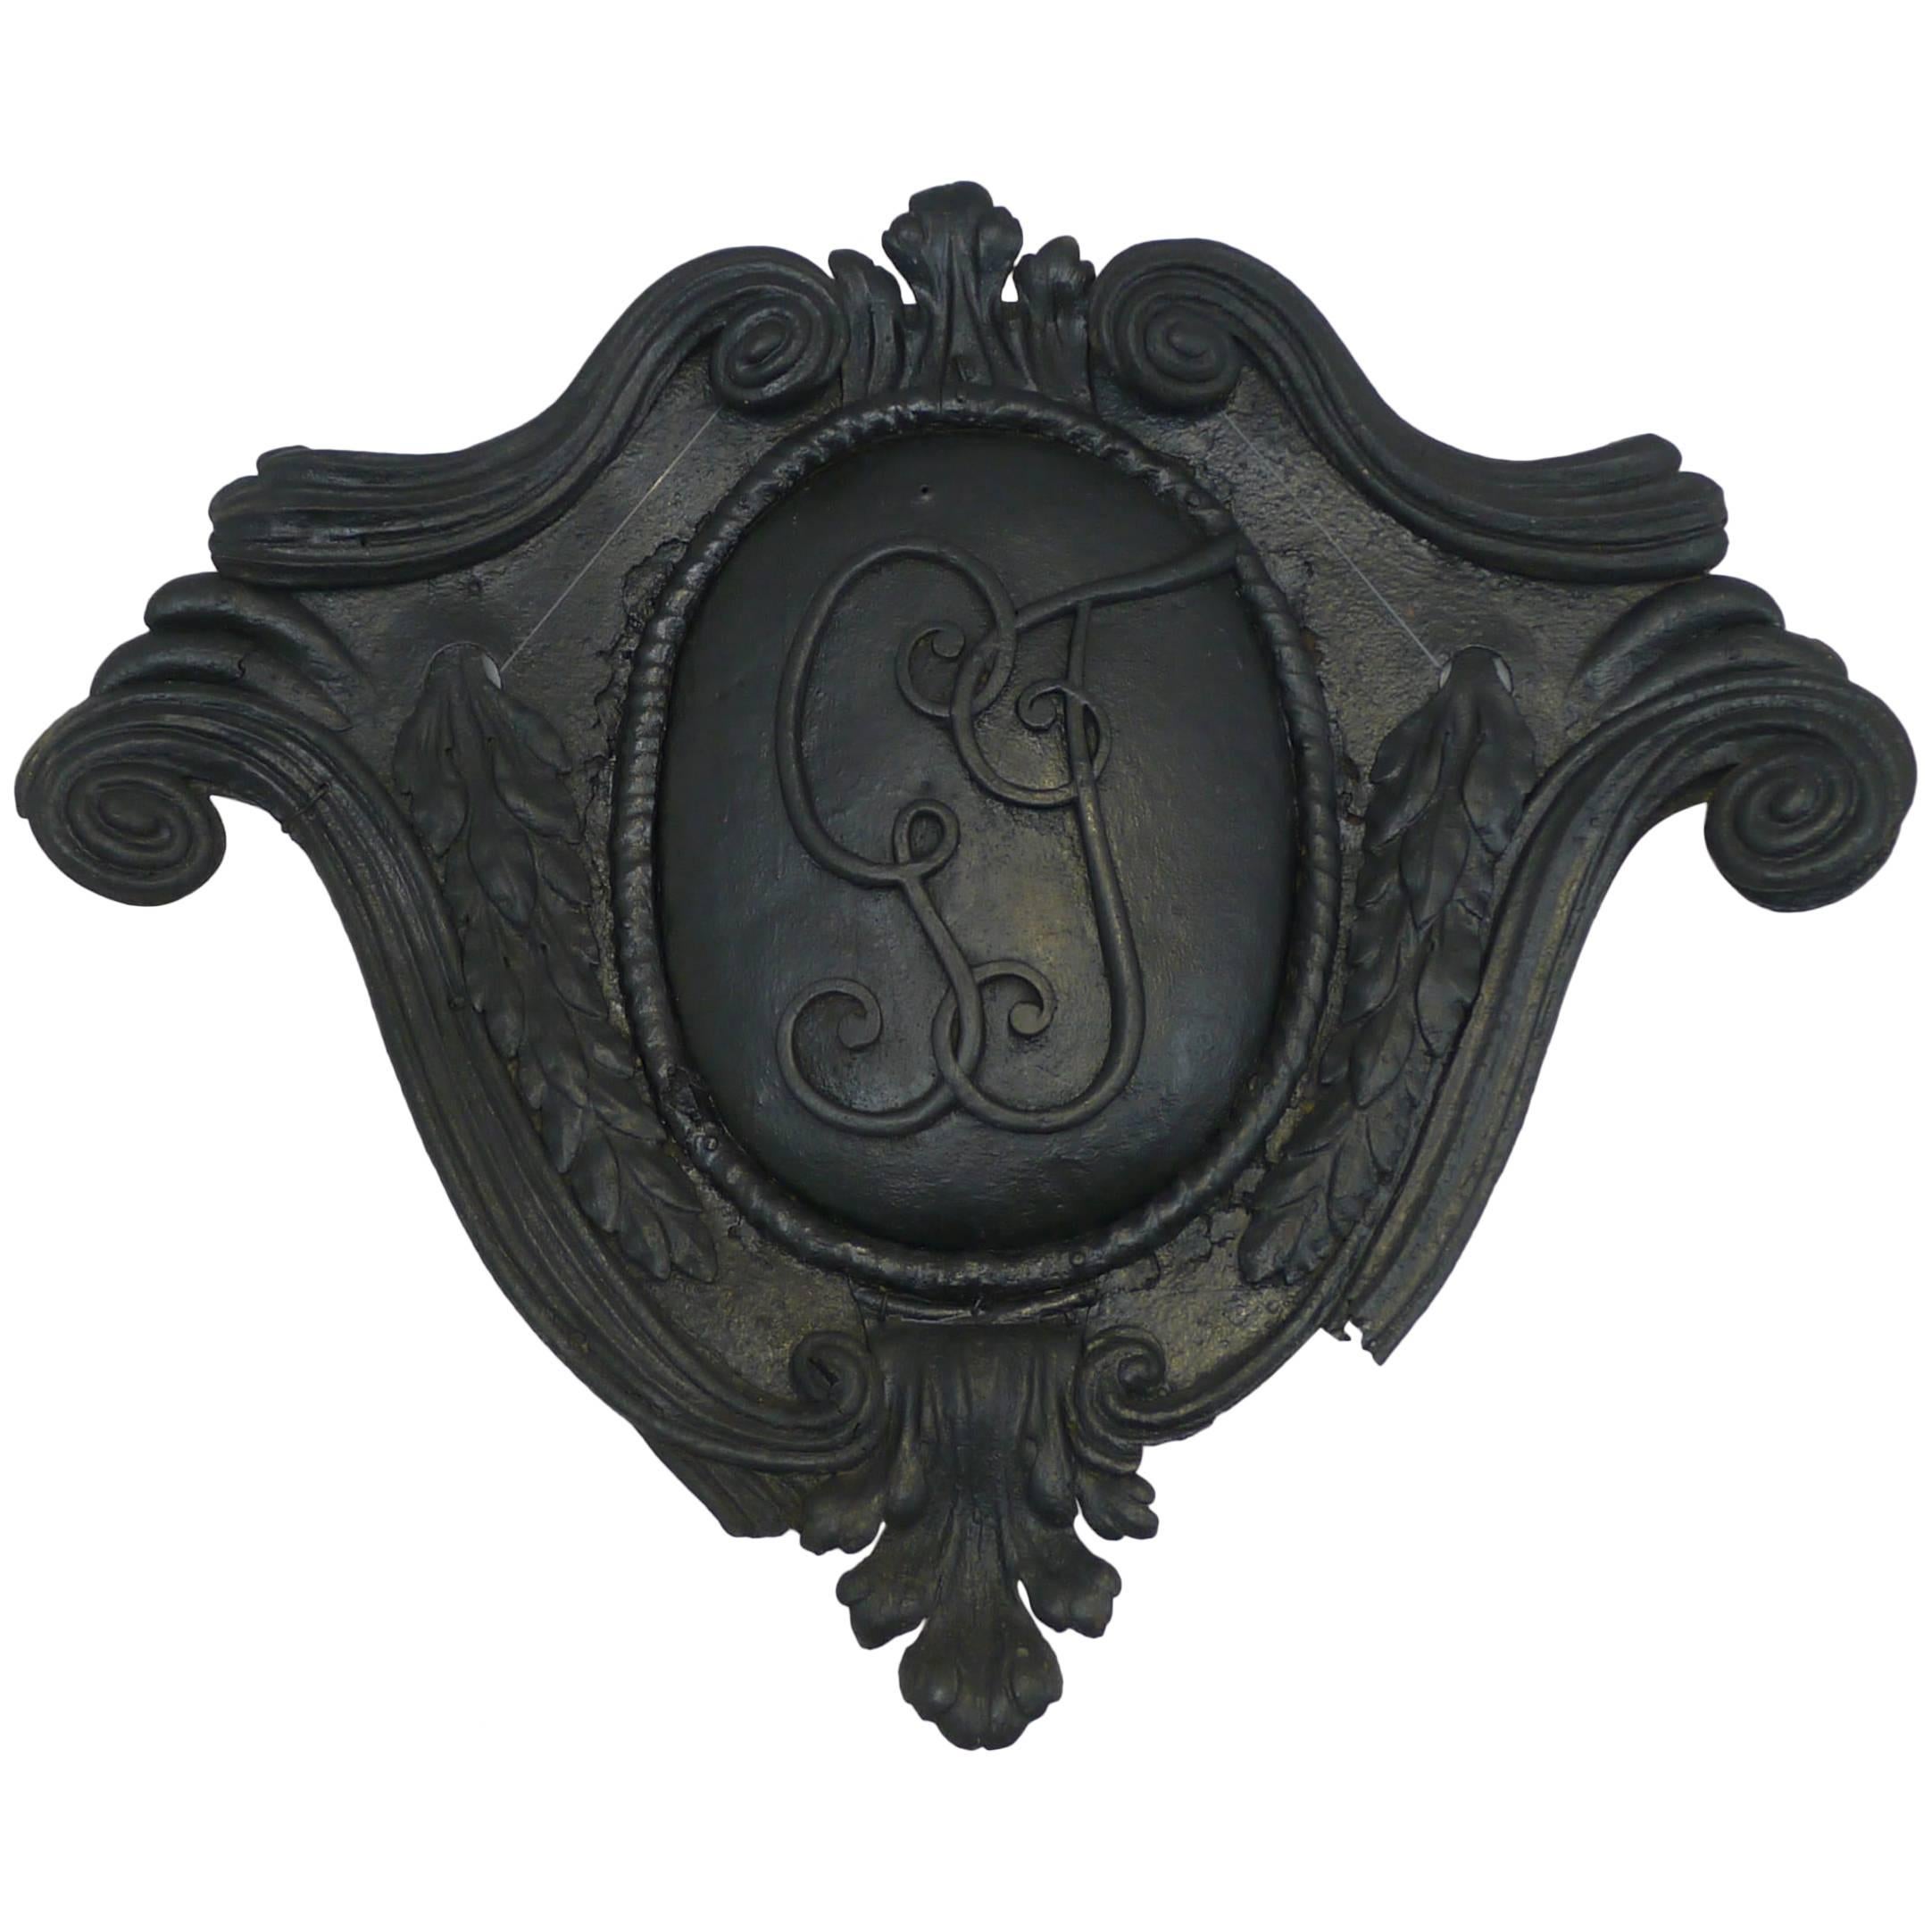 French Sign "G T" (18th century) For Sale